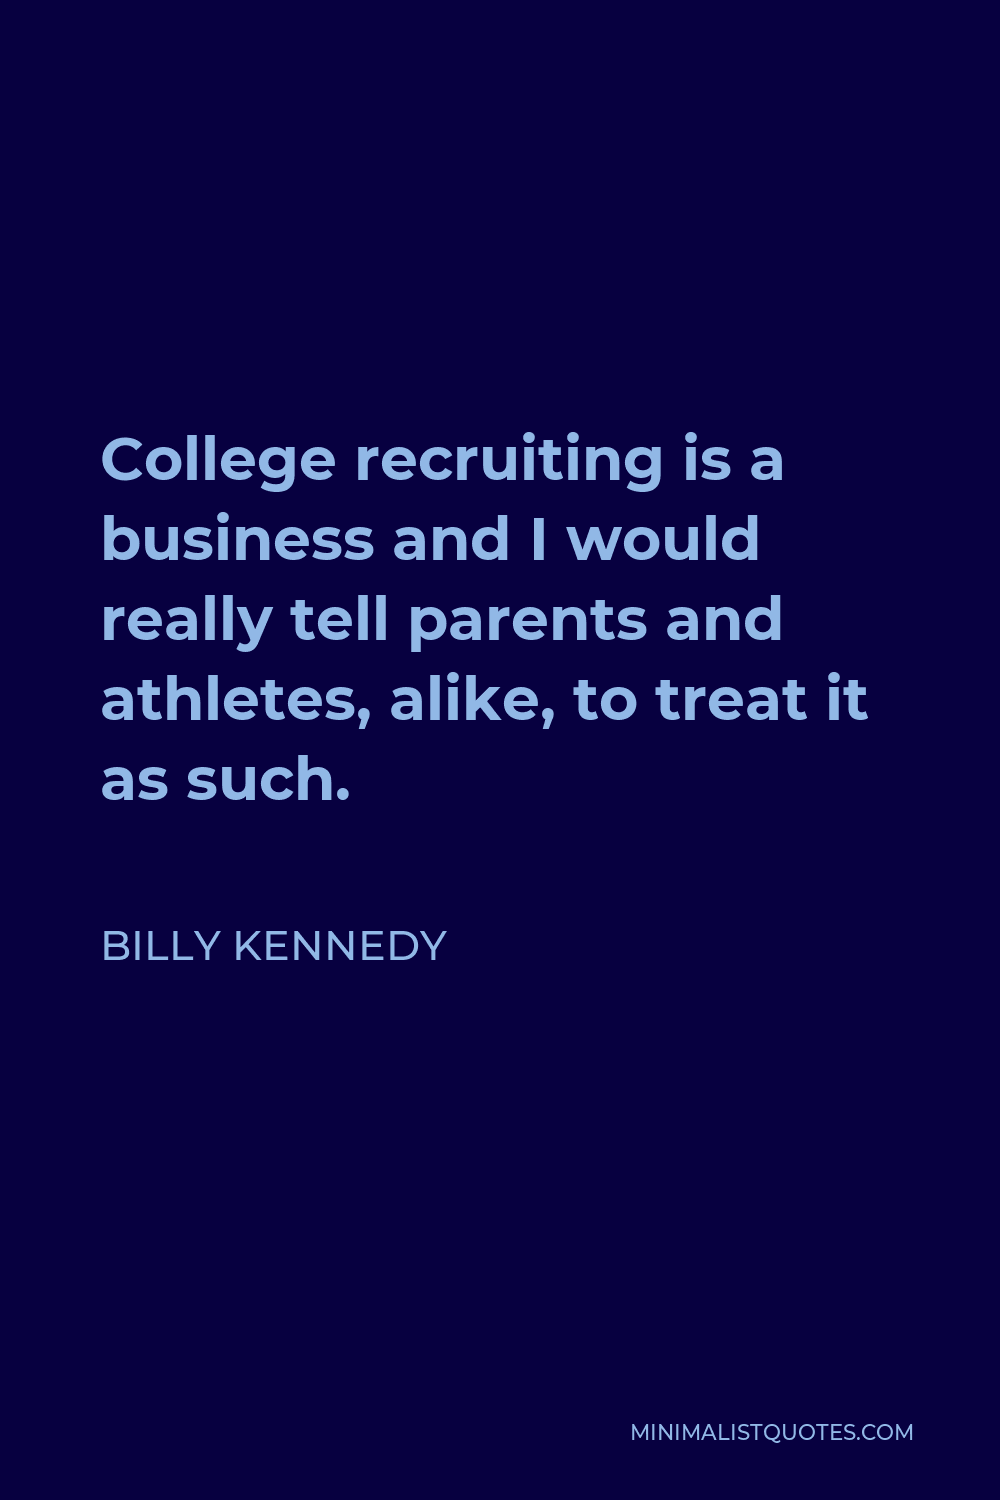 Billy Kennedy Quote - College recruiting is a business and I would really tell parents and athletes, alike, to treat it as such.